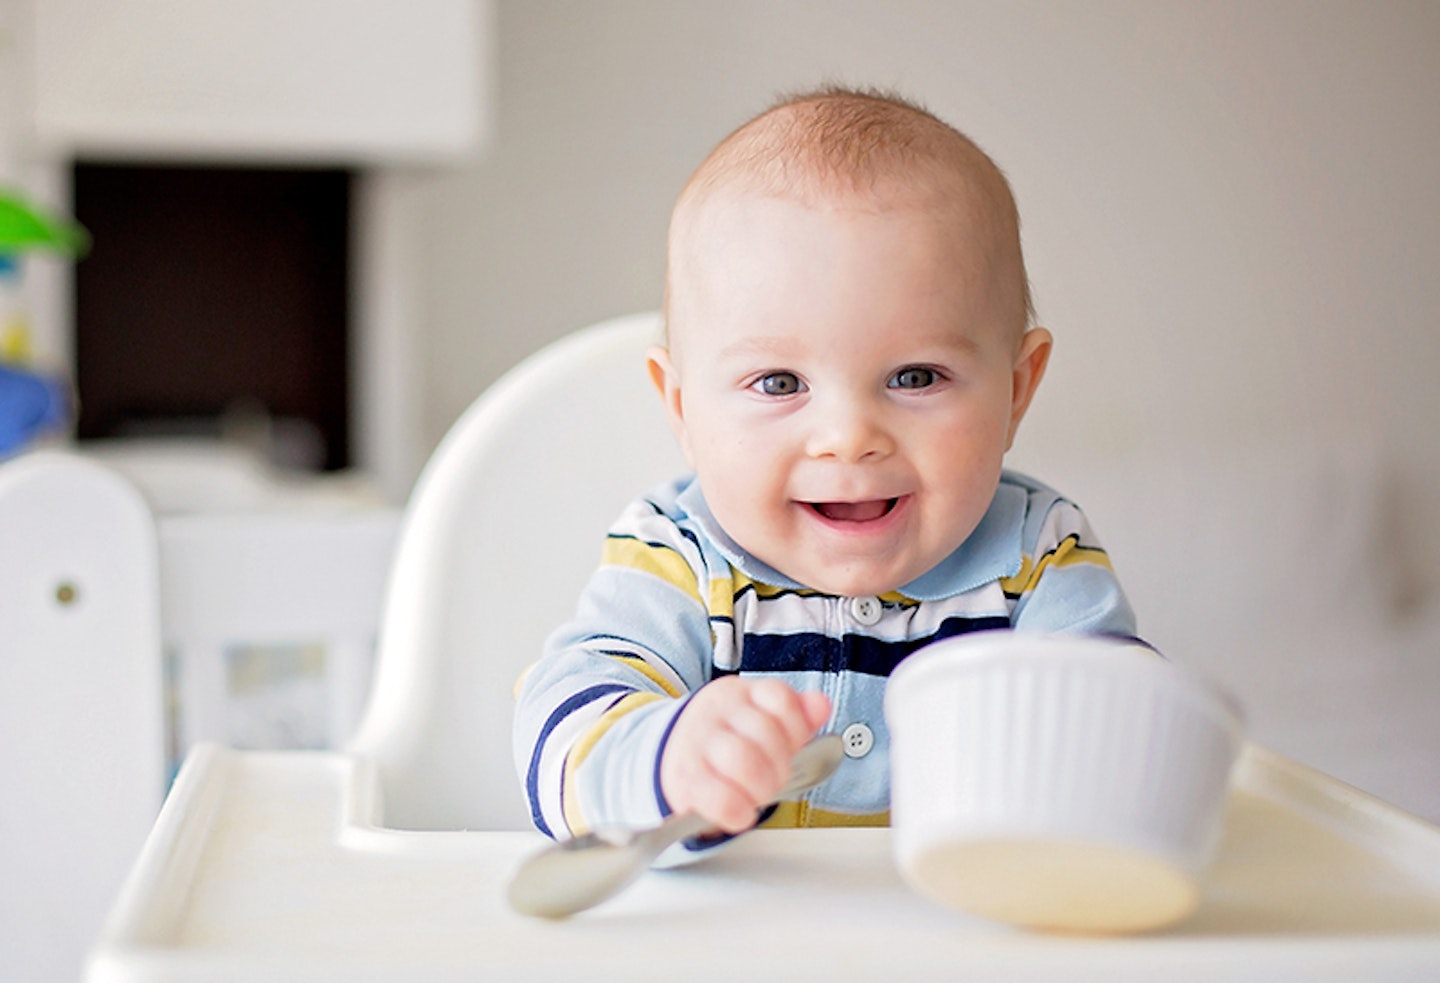 Easy Tricks to Teach Toddlers to Feed Themselves - Your Kid's Table